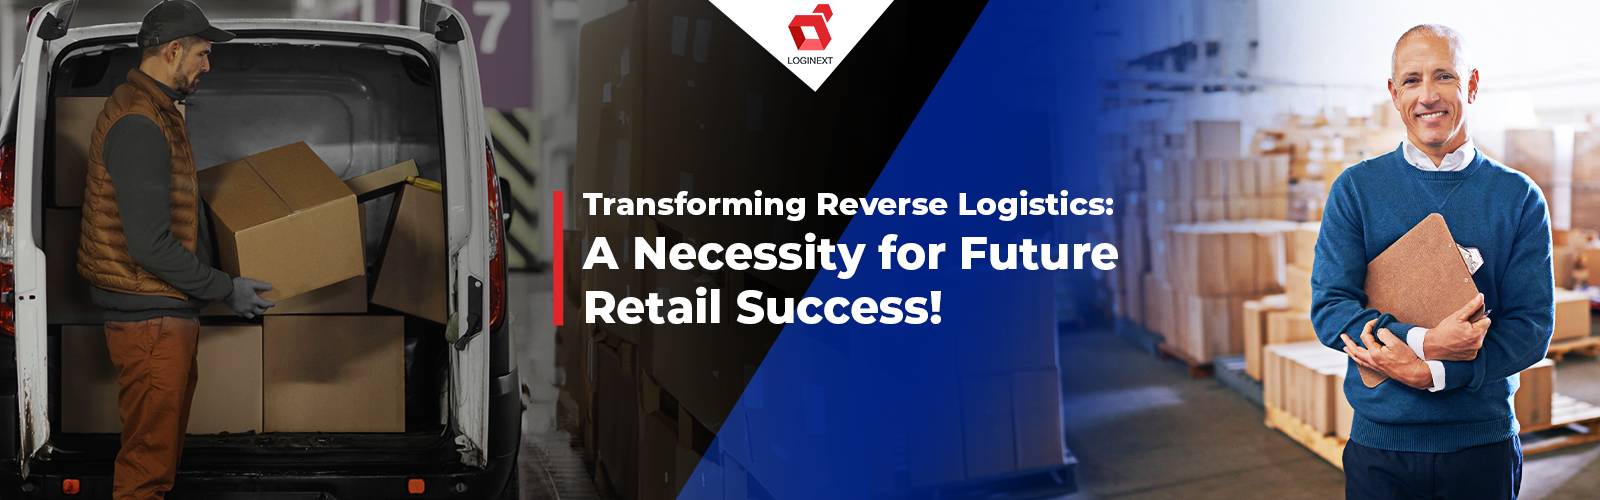 How transforming Reverse Logistics holds key for retail success